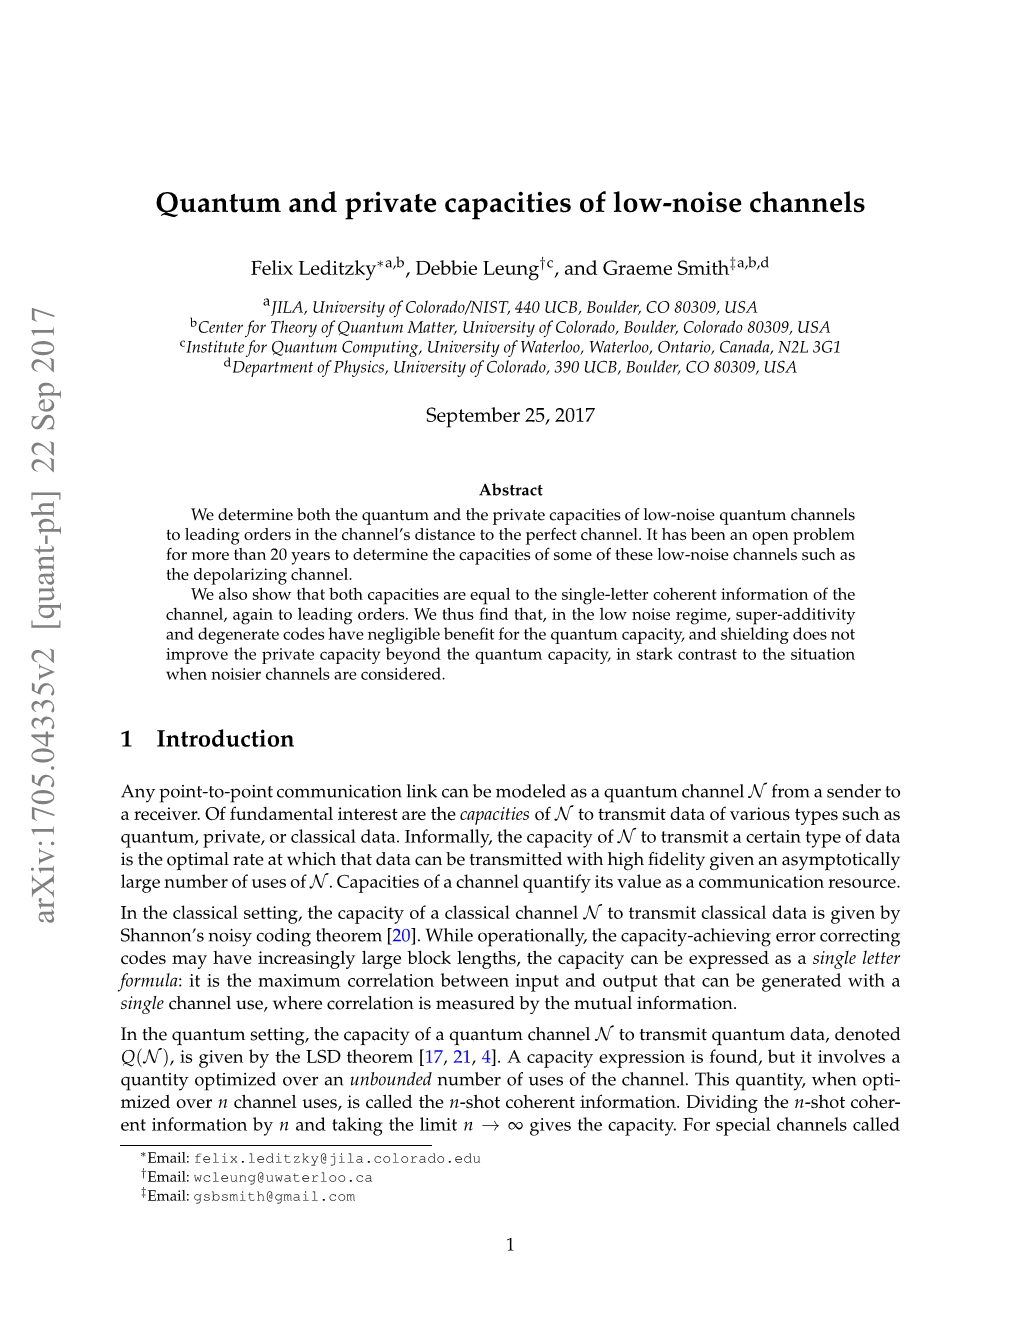 Quantum and Private Capacities of Low-Noise Channels